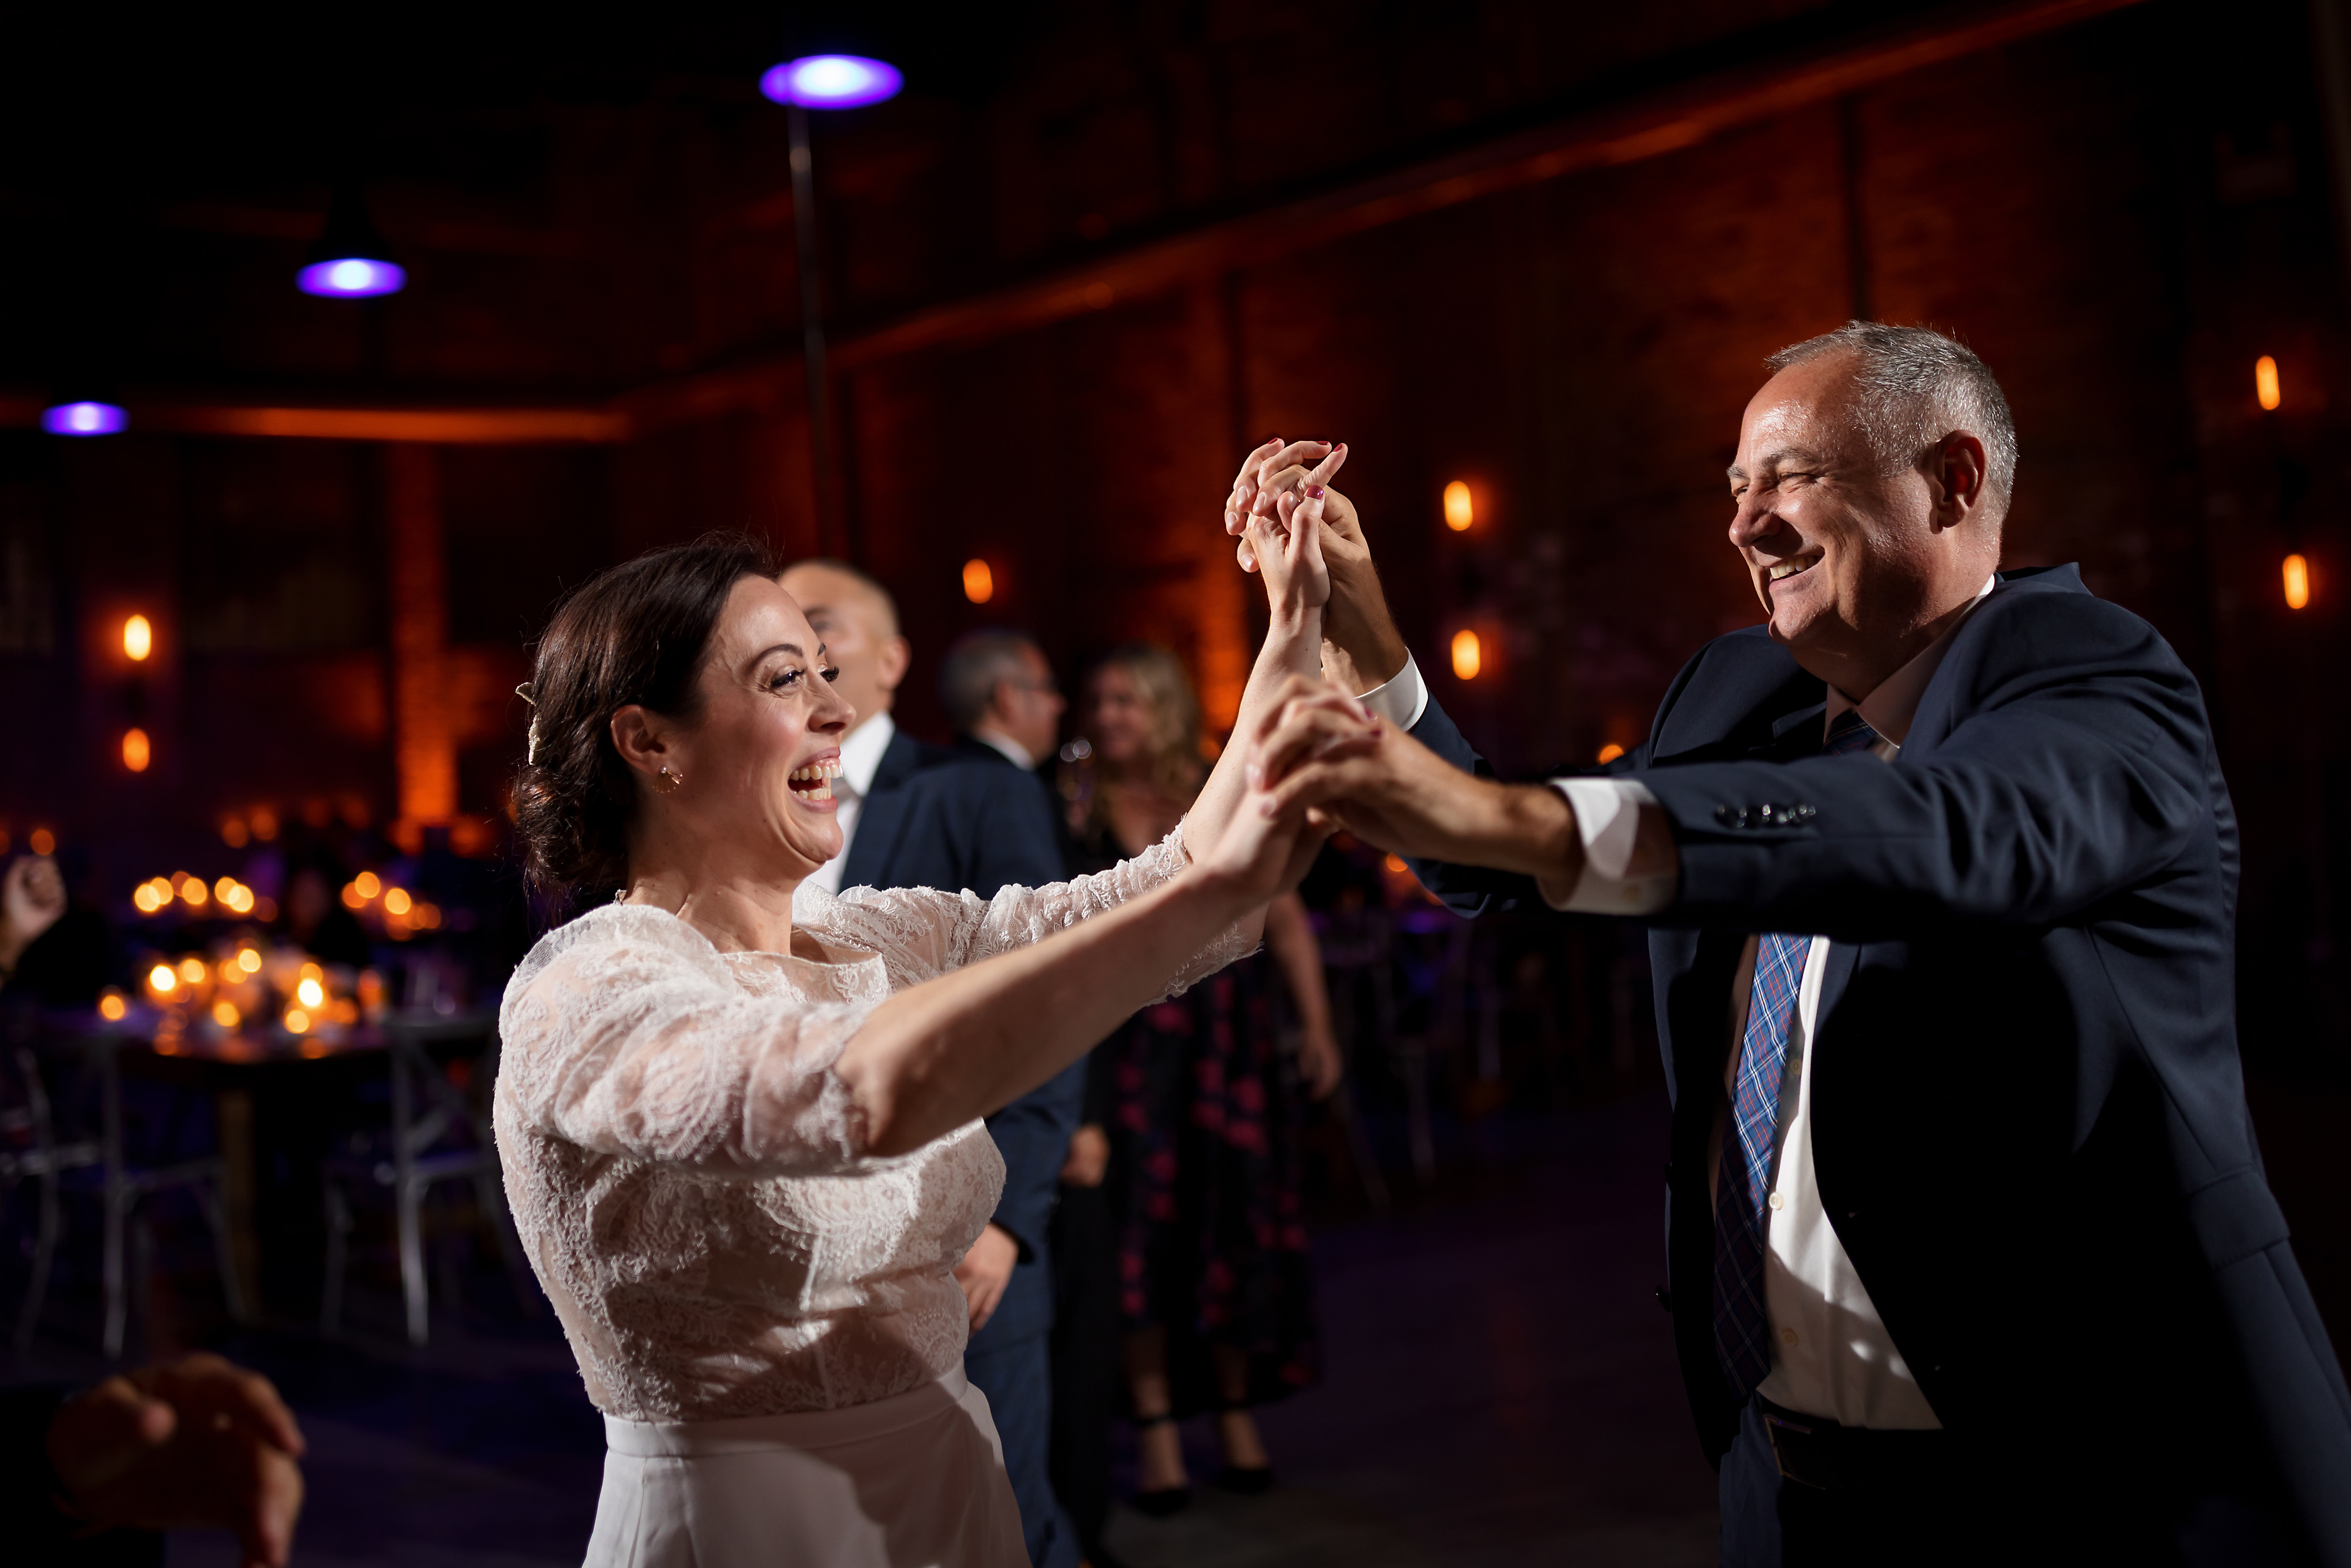 wedding guests dance during reception at The Fairlie